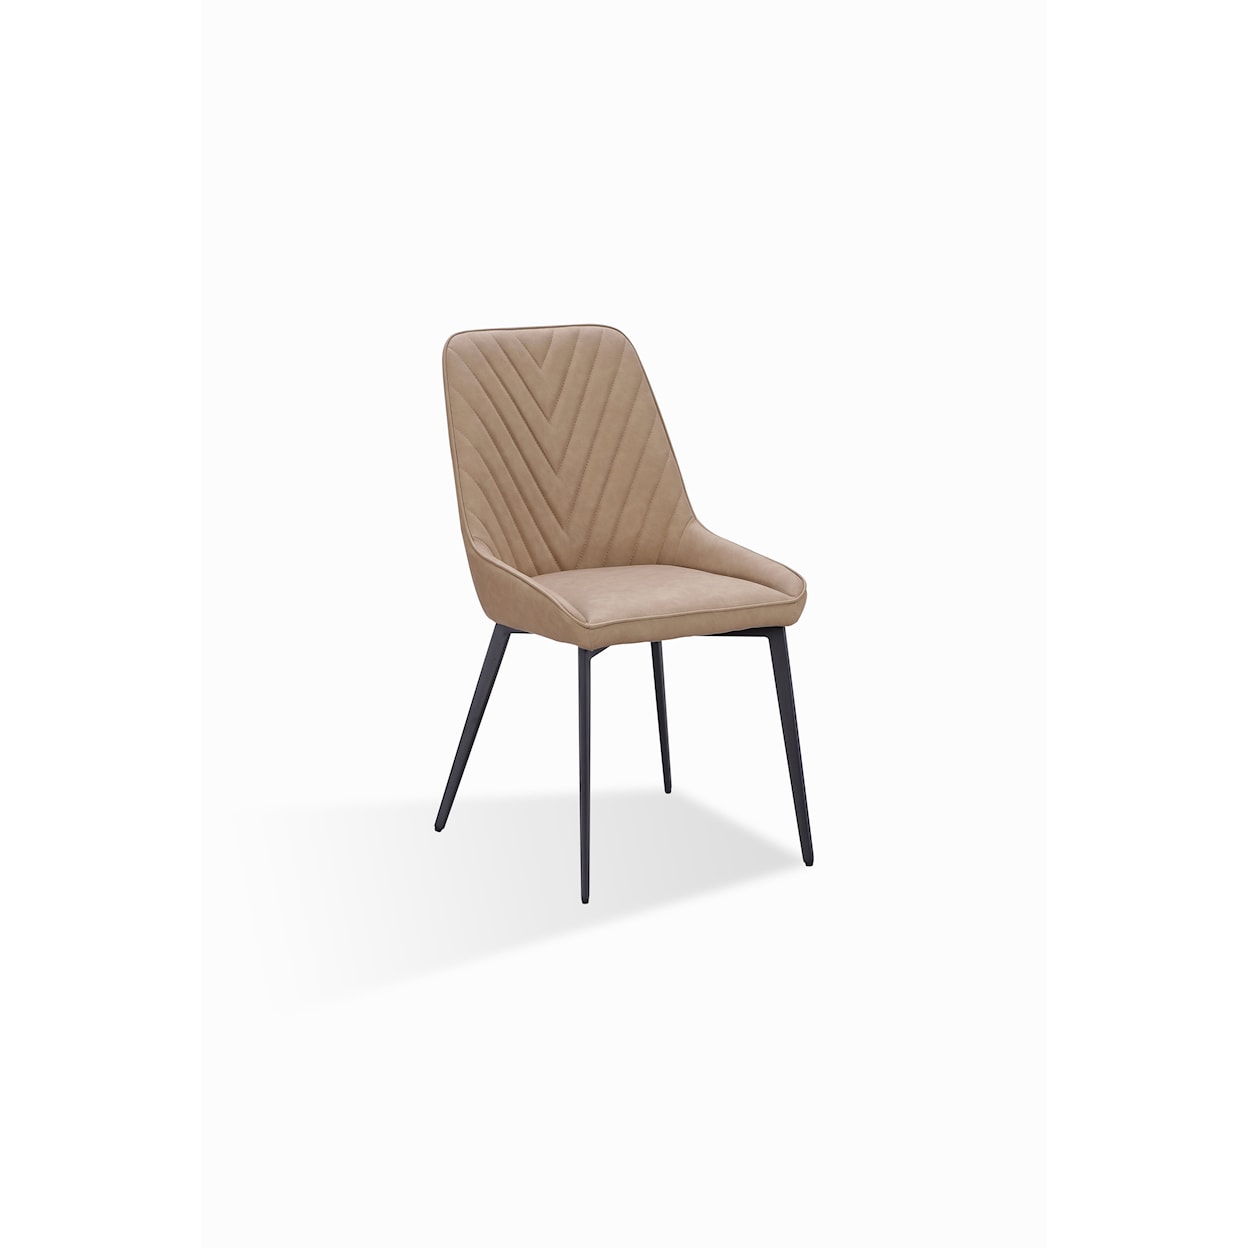 Modus International Lucia Upholstered Dining Chair In Honey